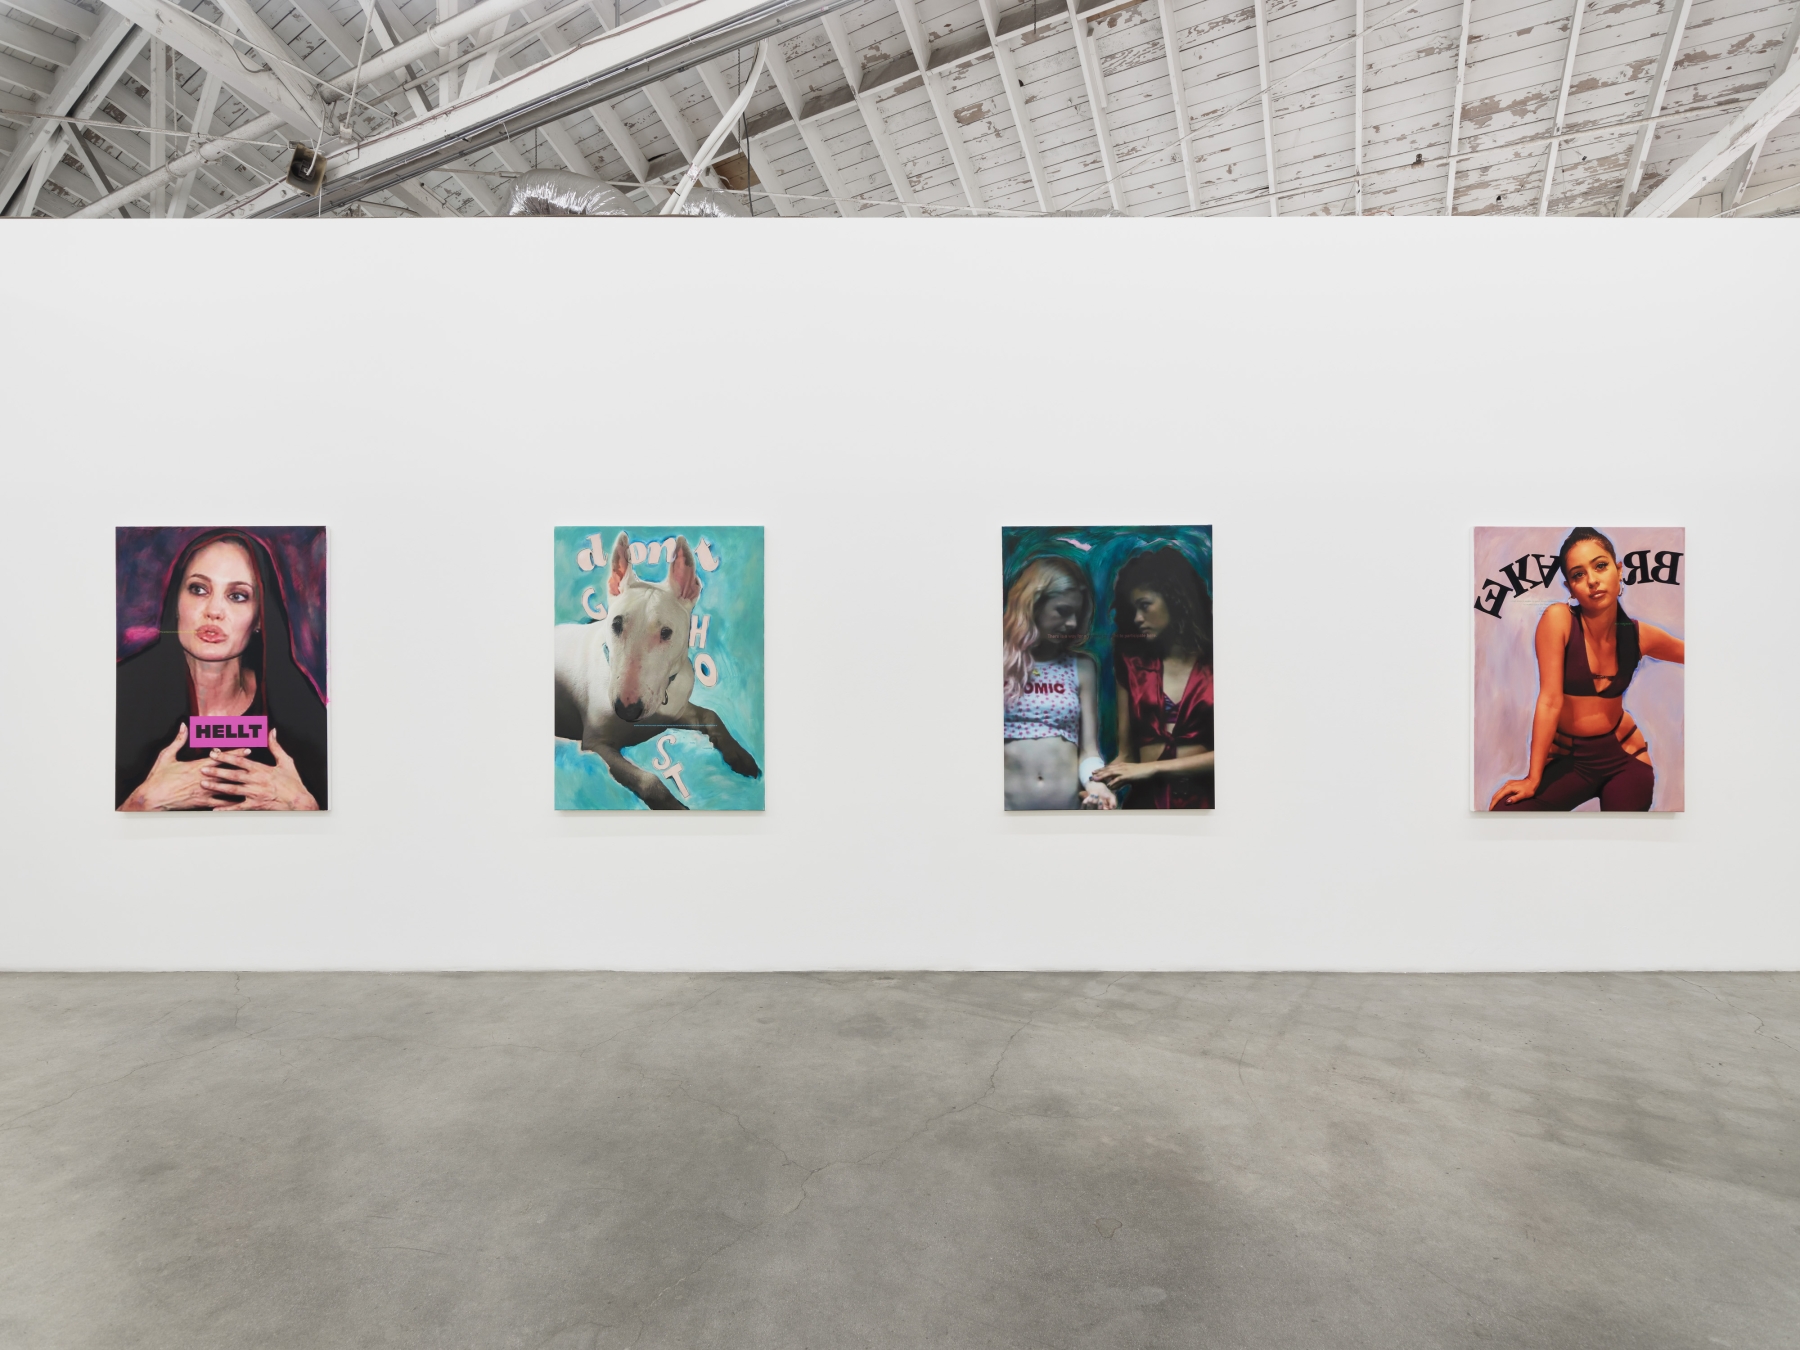 Cara&nbsp;Benedetto, Love You, installation view, 2022